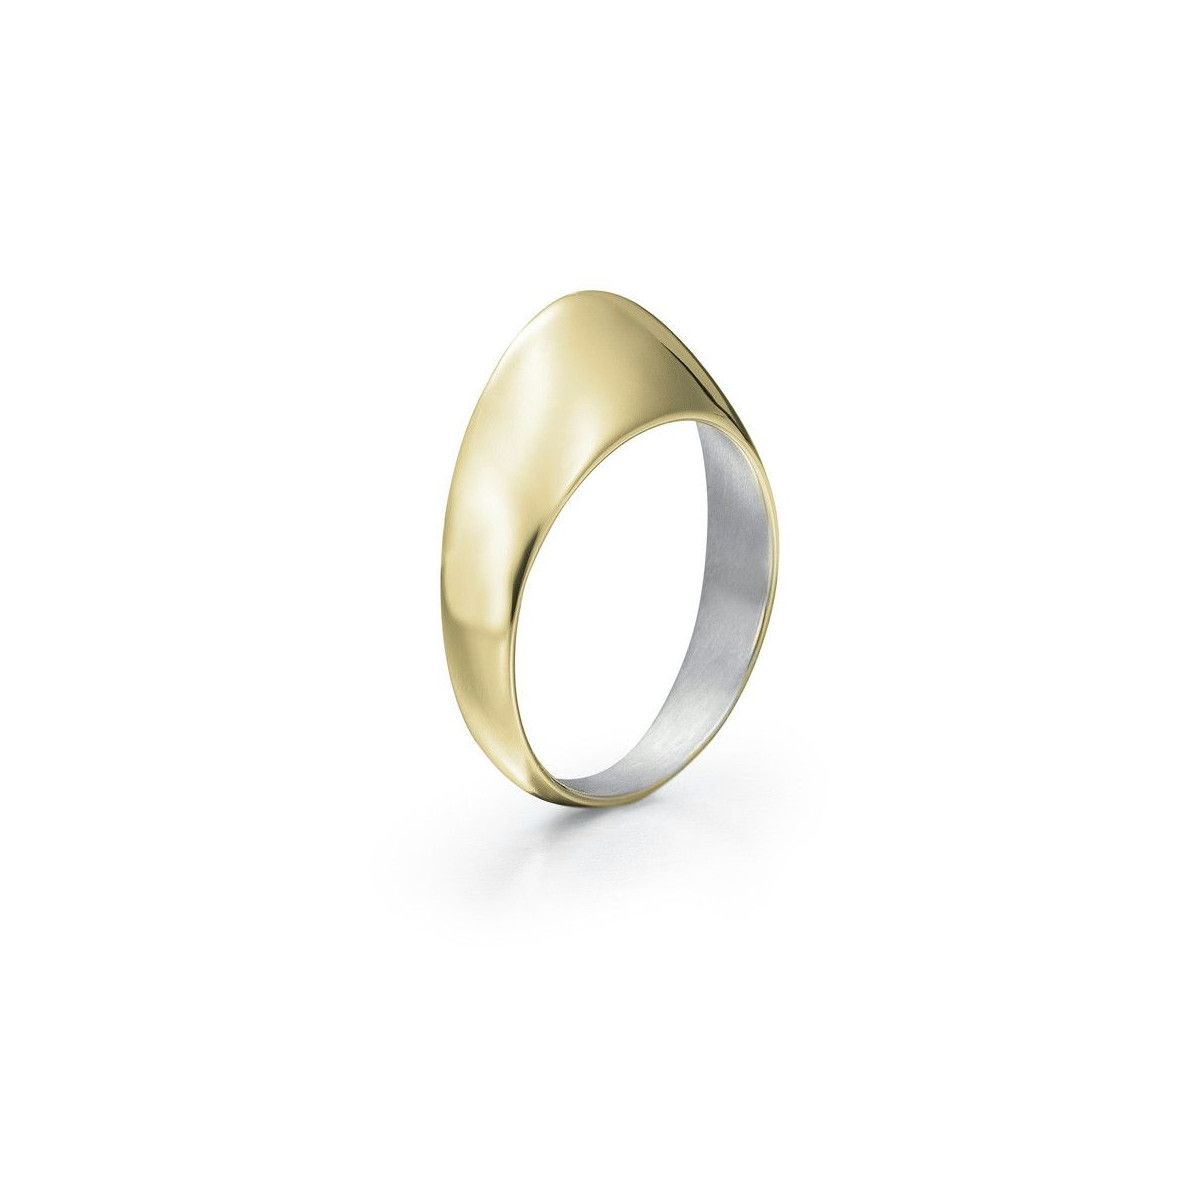 BUBBLE Ring in Silver. 18k Gold Vermeil